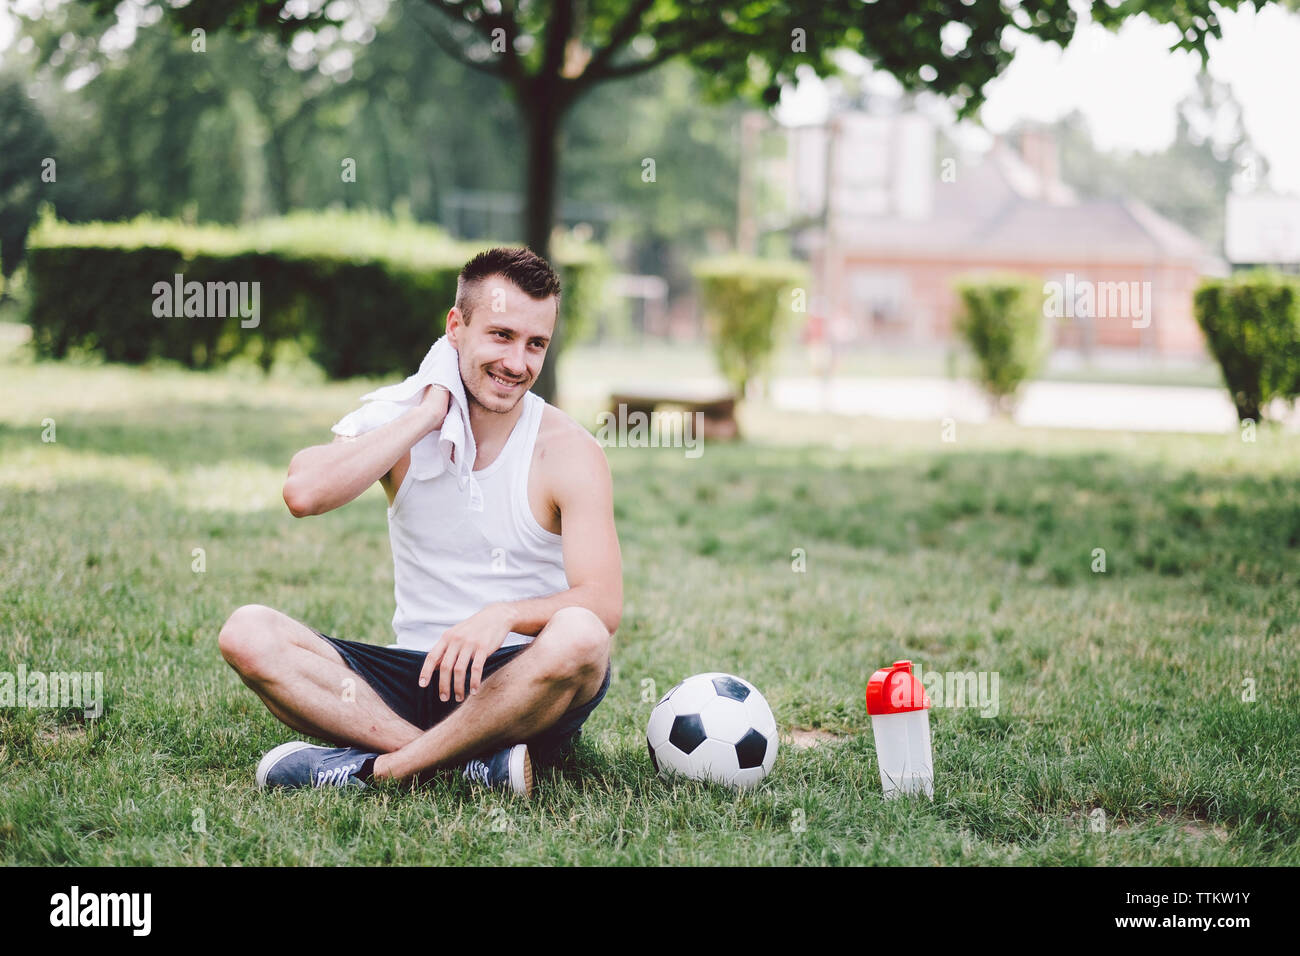 Smiling young man wiping neck while sitting on soccer field at park Stock Photo